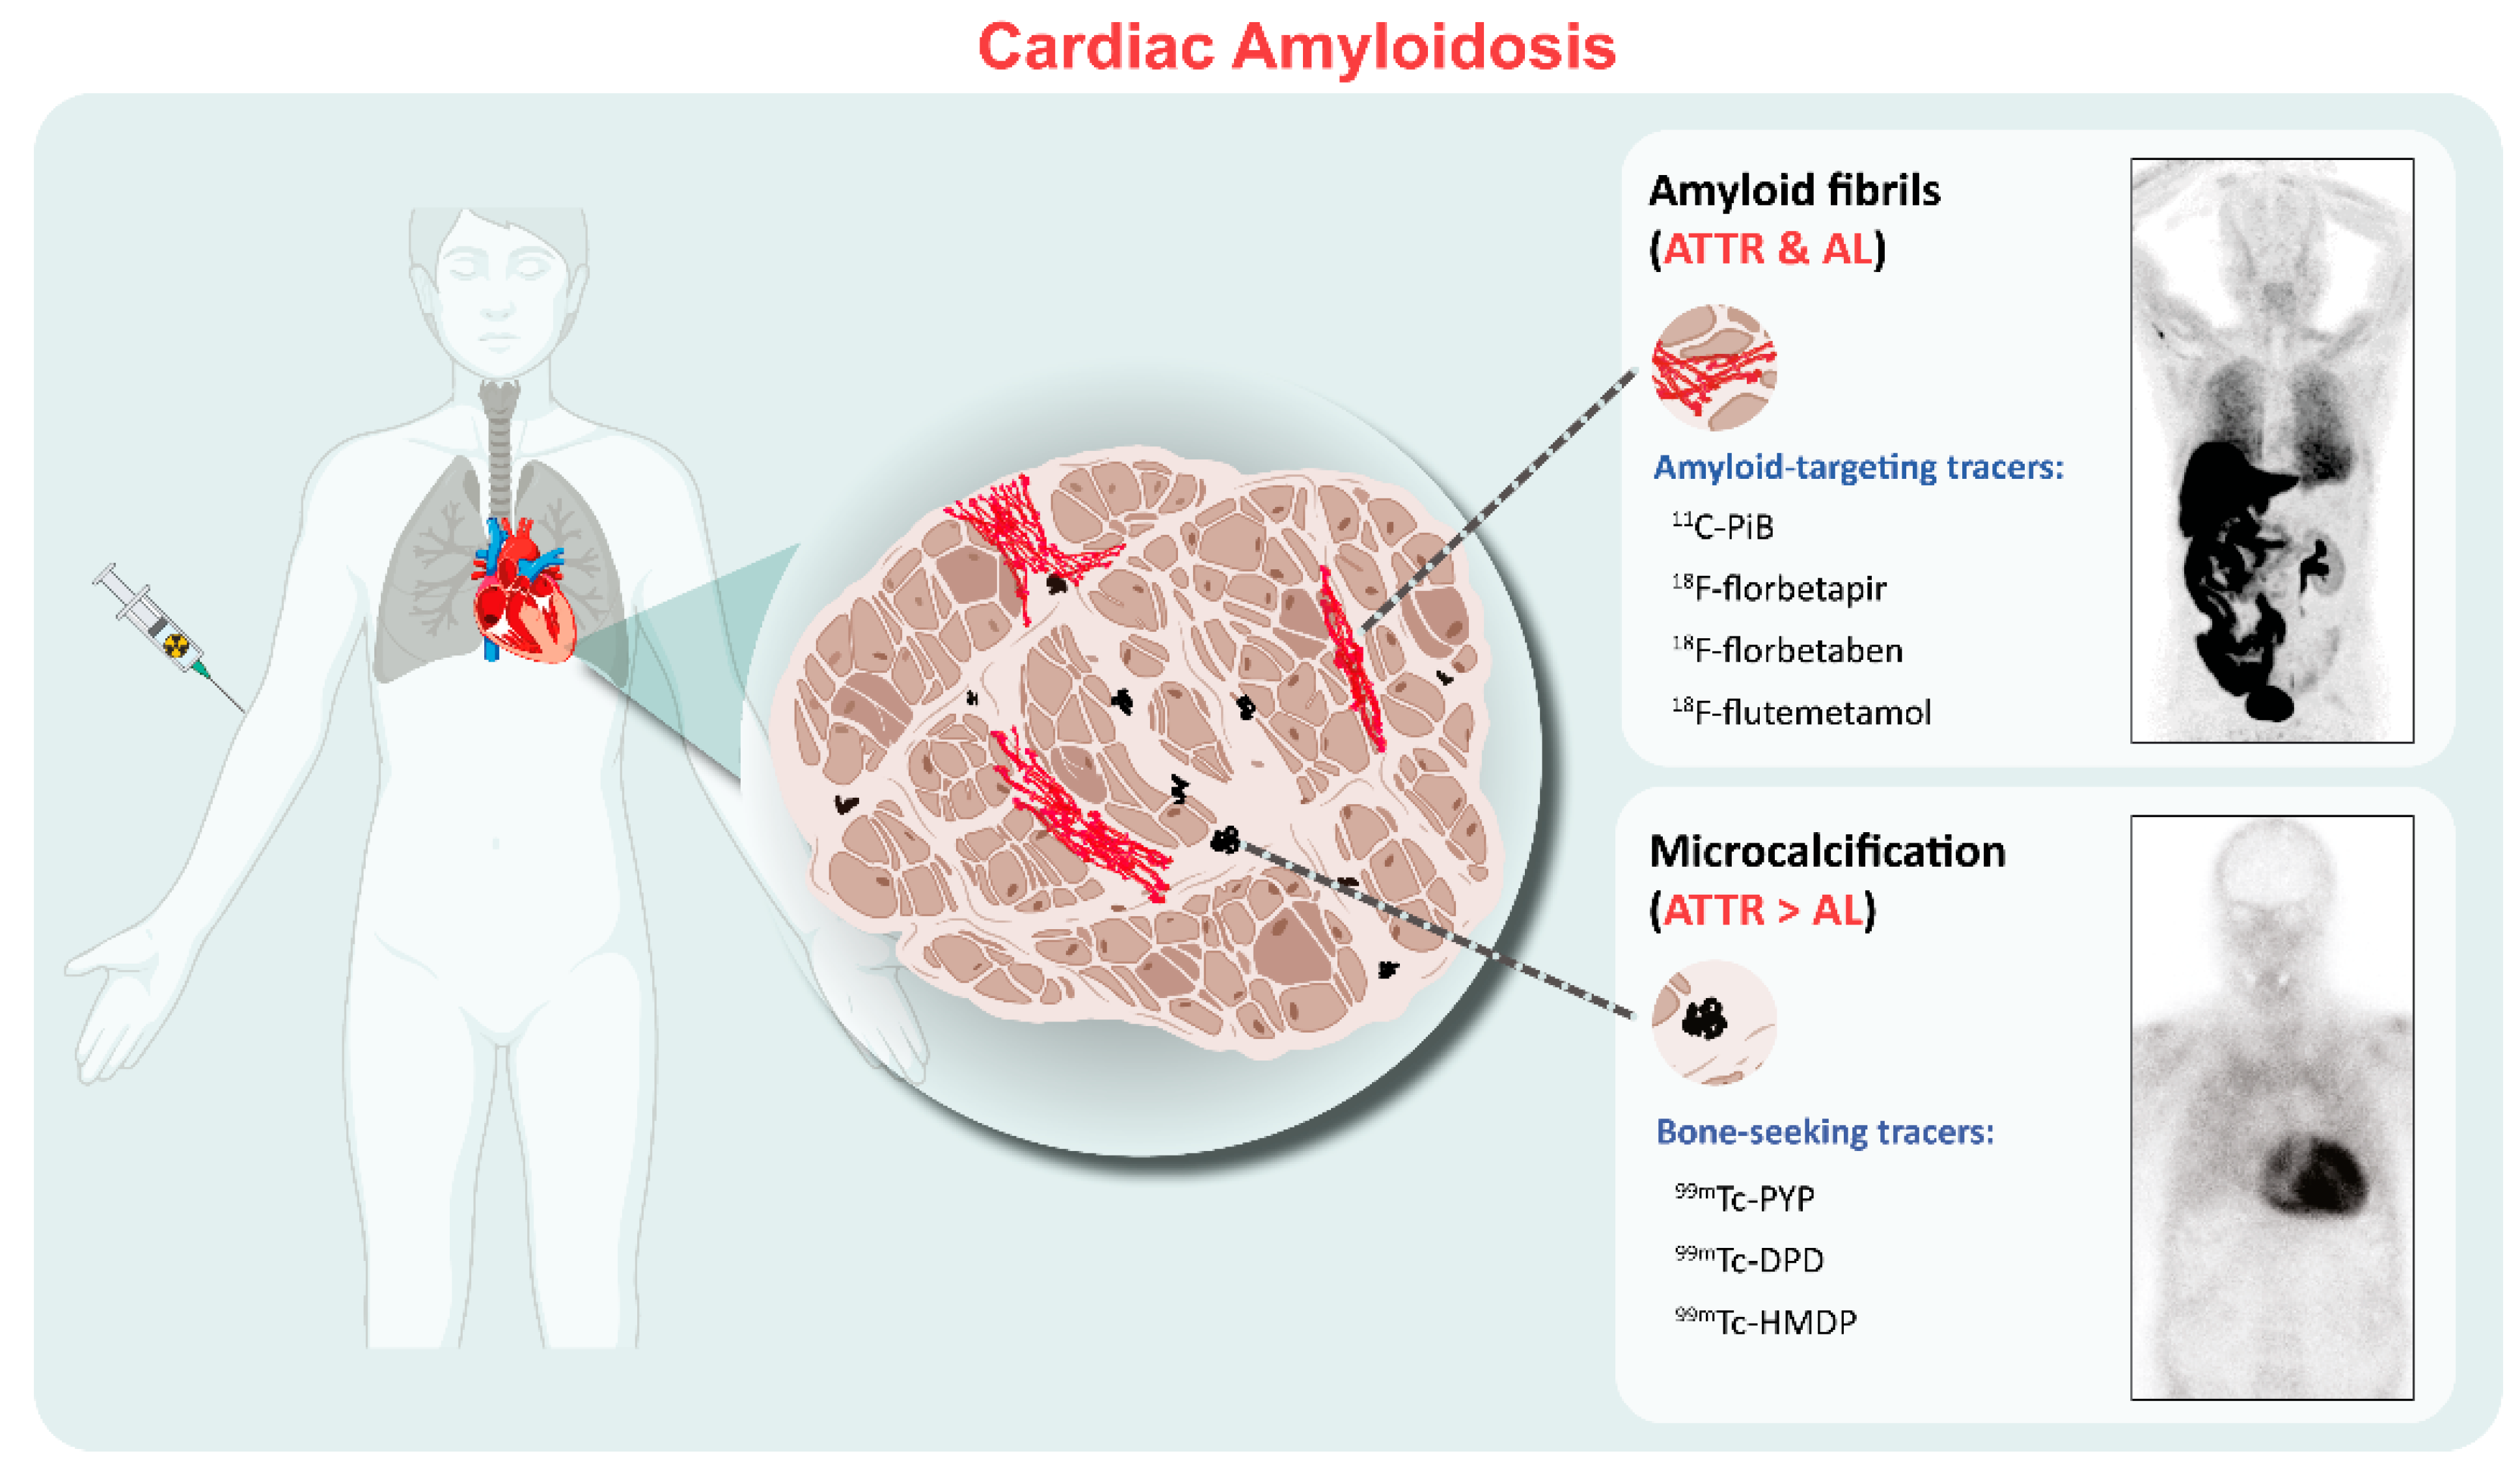 Diagnostic and prognostic value of cardiac imaging in amyloidosis